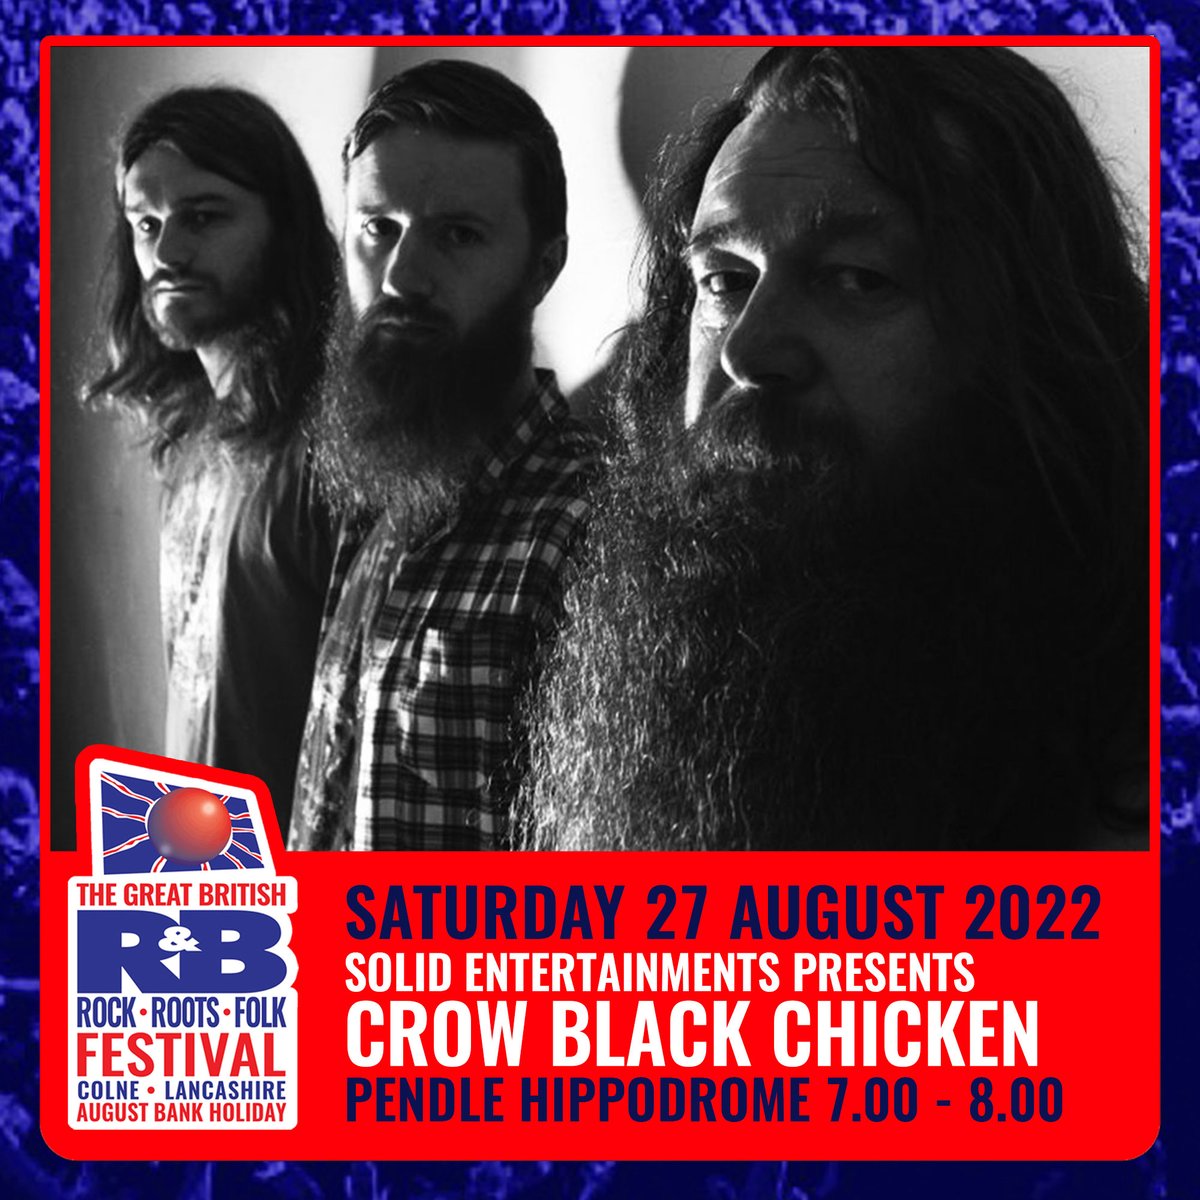 Really looking forward to playing the Great British Blues Festival in Colne this August. Festival info and ticket link here colneblueslineup.com/crow-black-chi…